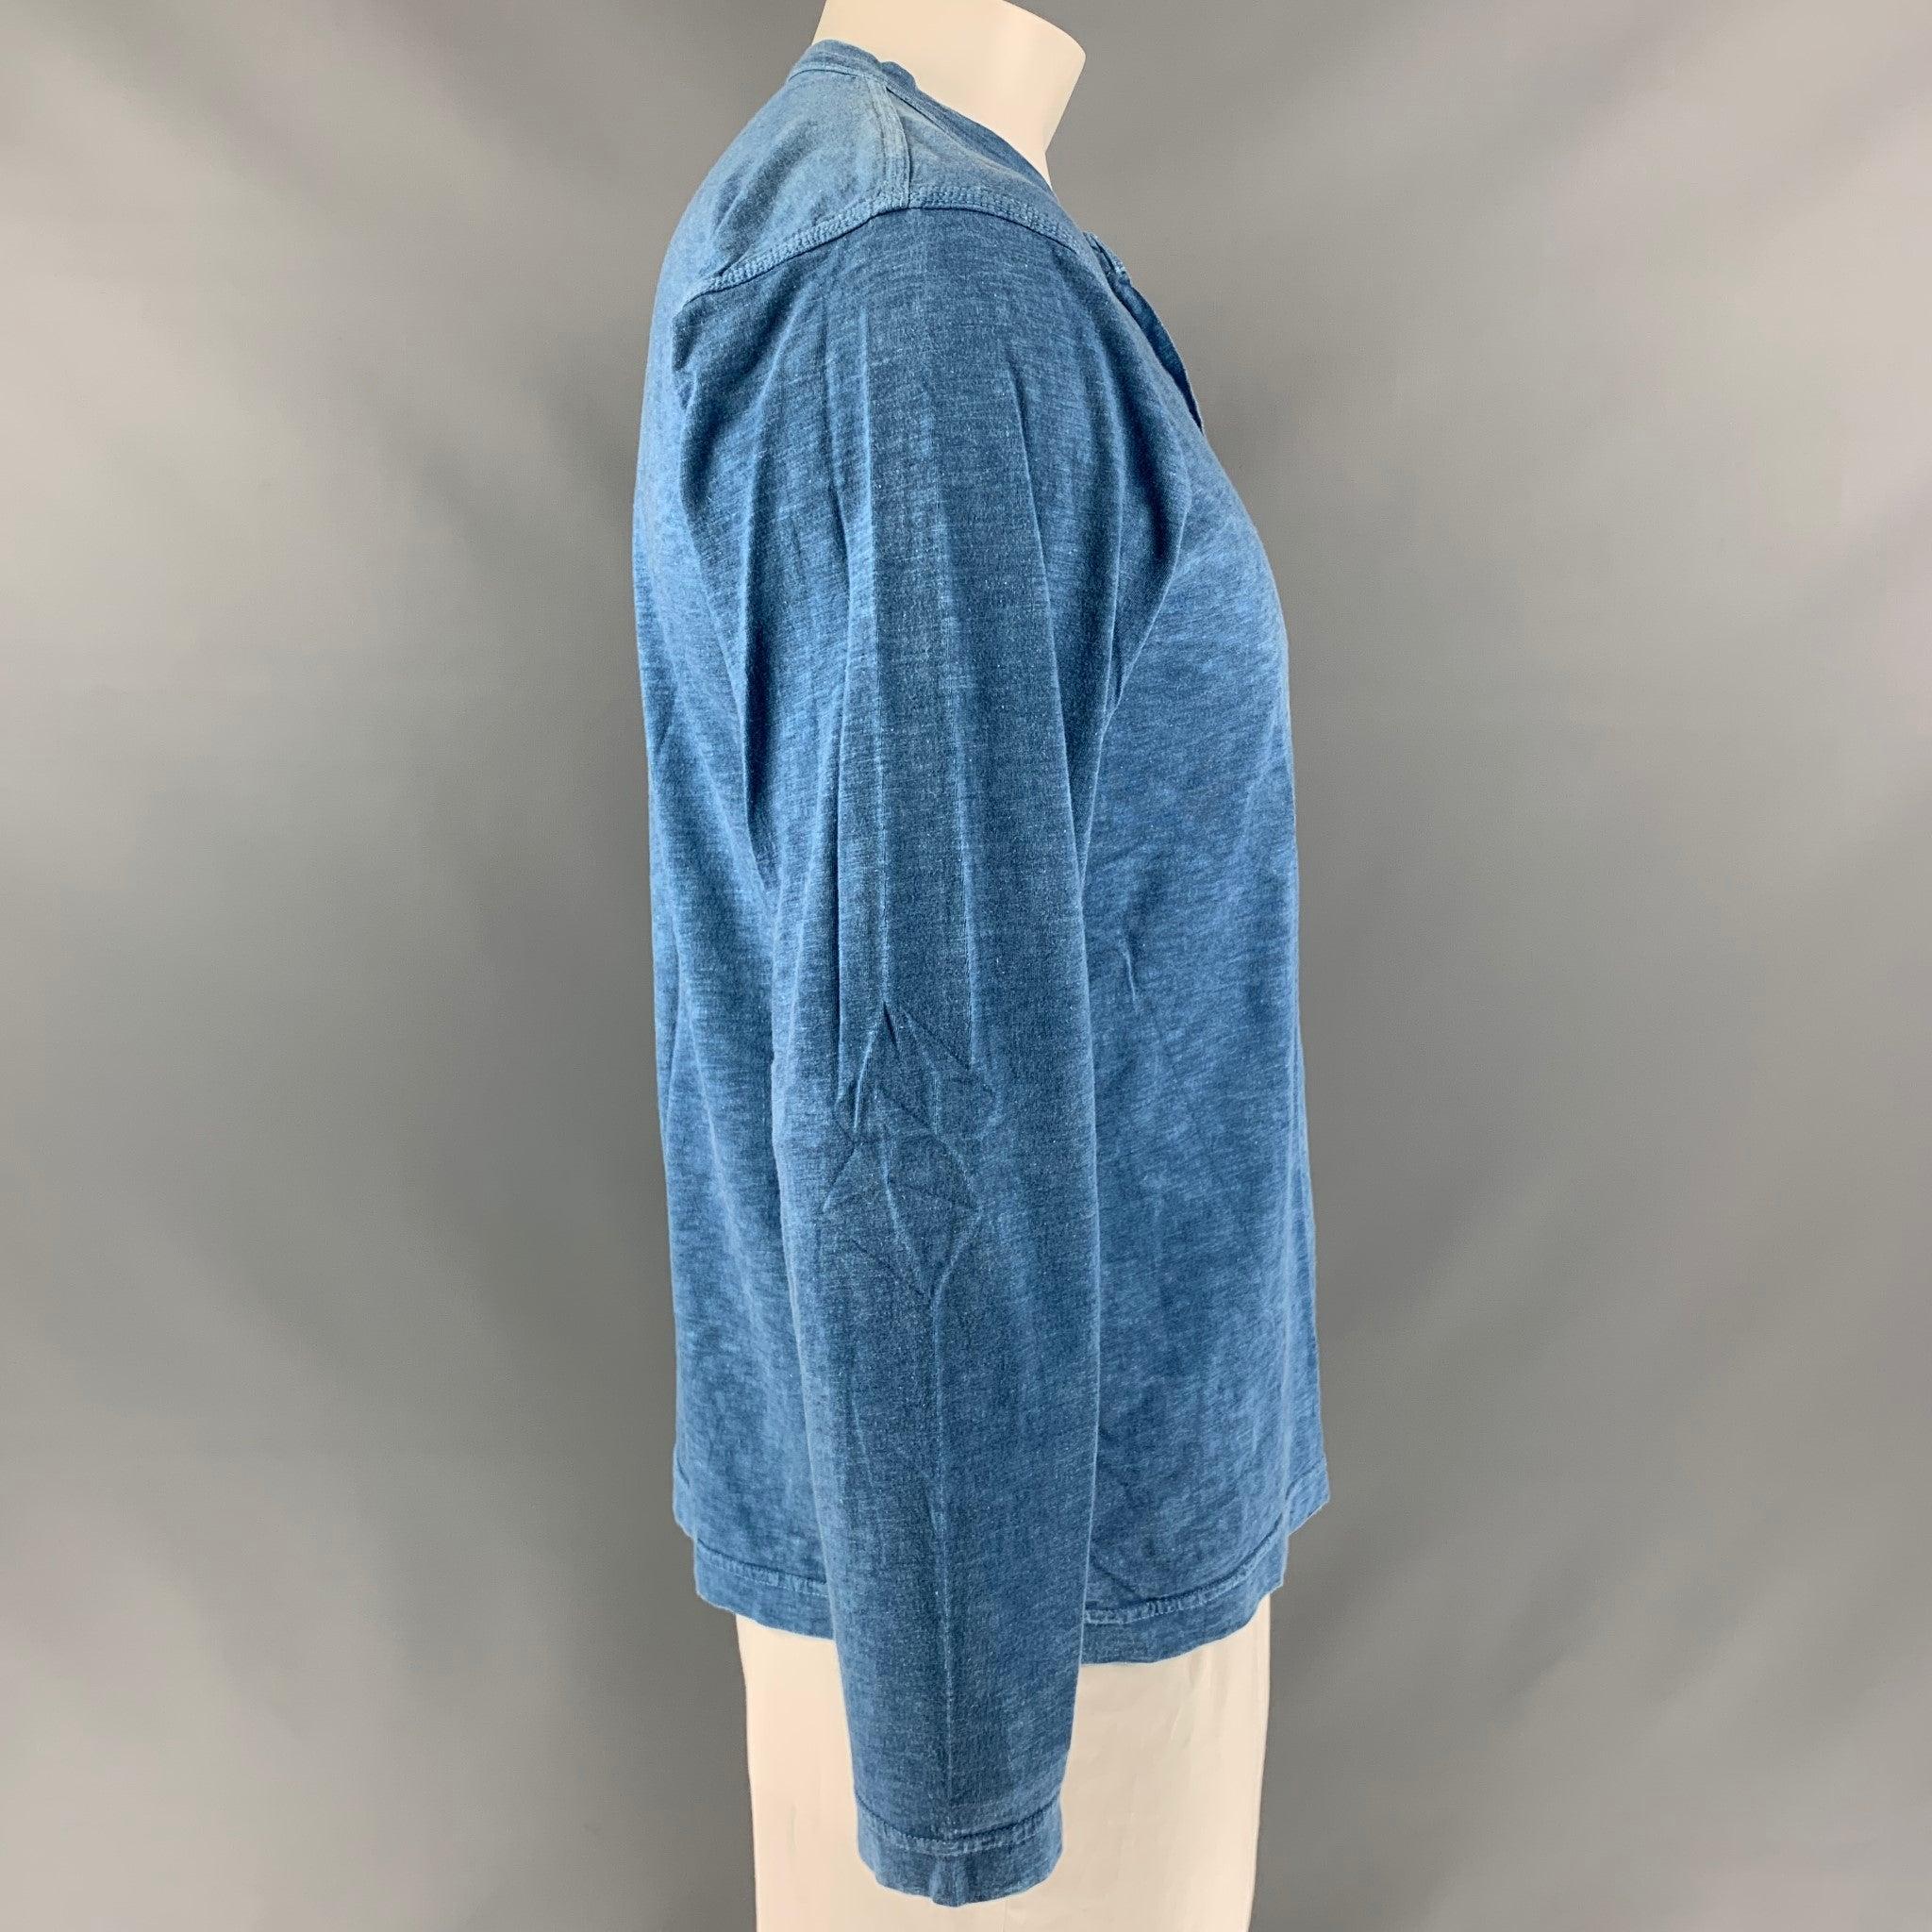 45rpm henley pullover comes in blue cotton jersey fabric. Made in Japan.Excellent Pre-Owned Condition.  
 

 Marked:  5 
 

 Measurements: 
  
 Shoulder: 19 inches Chest: 46 inches Sleeve: 22 inches Length: 26 inches  
 

  
  
  
 Sui Generis